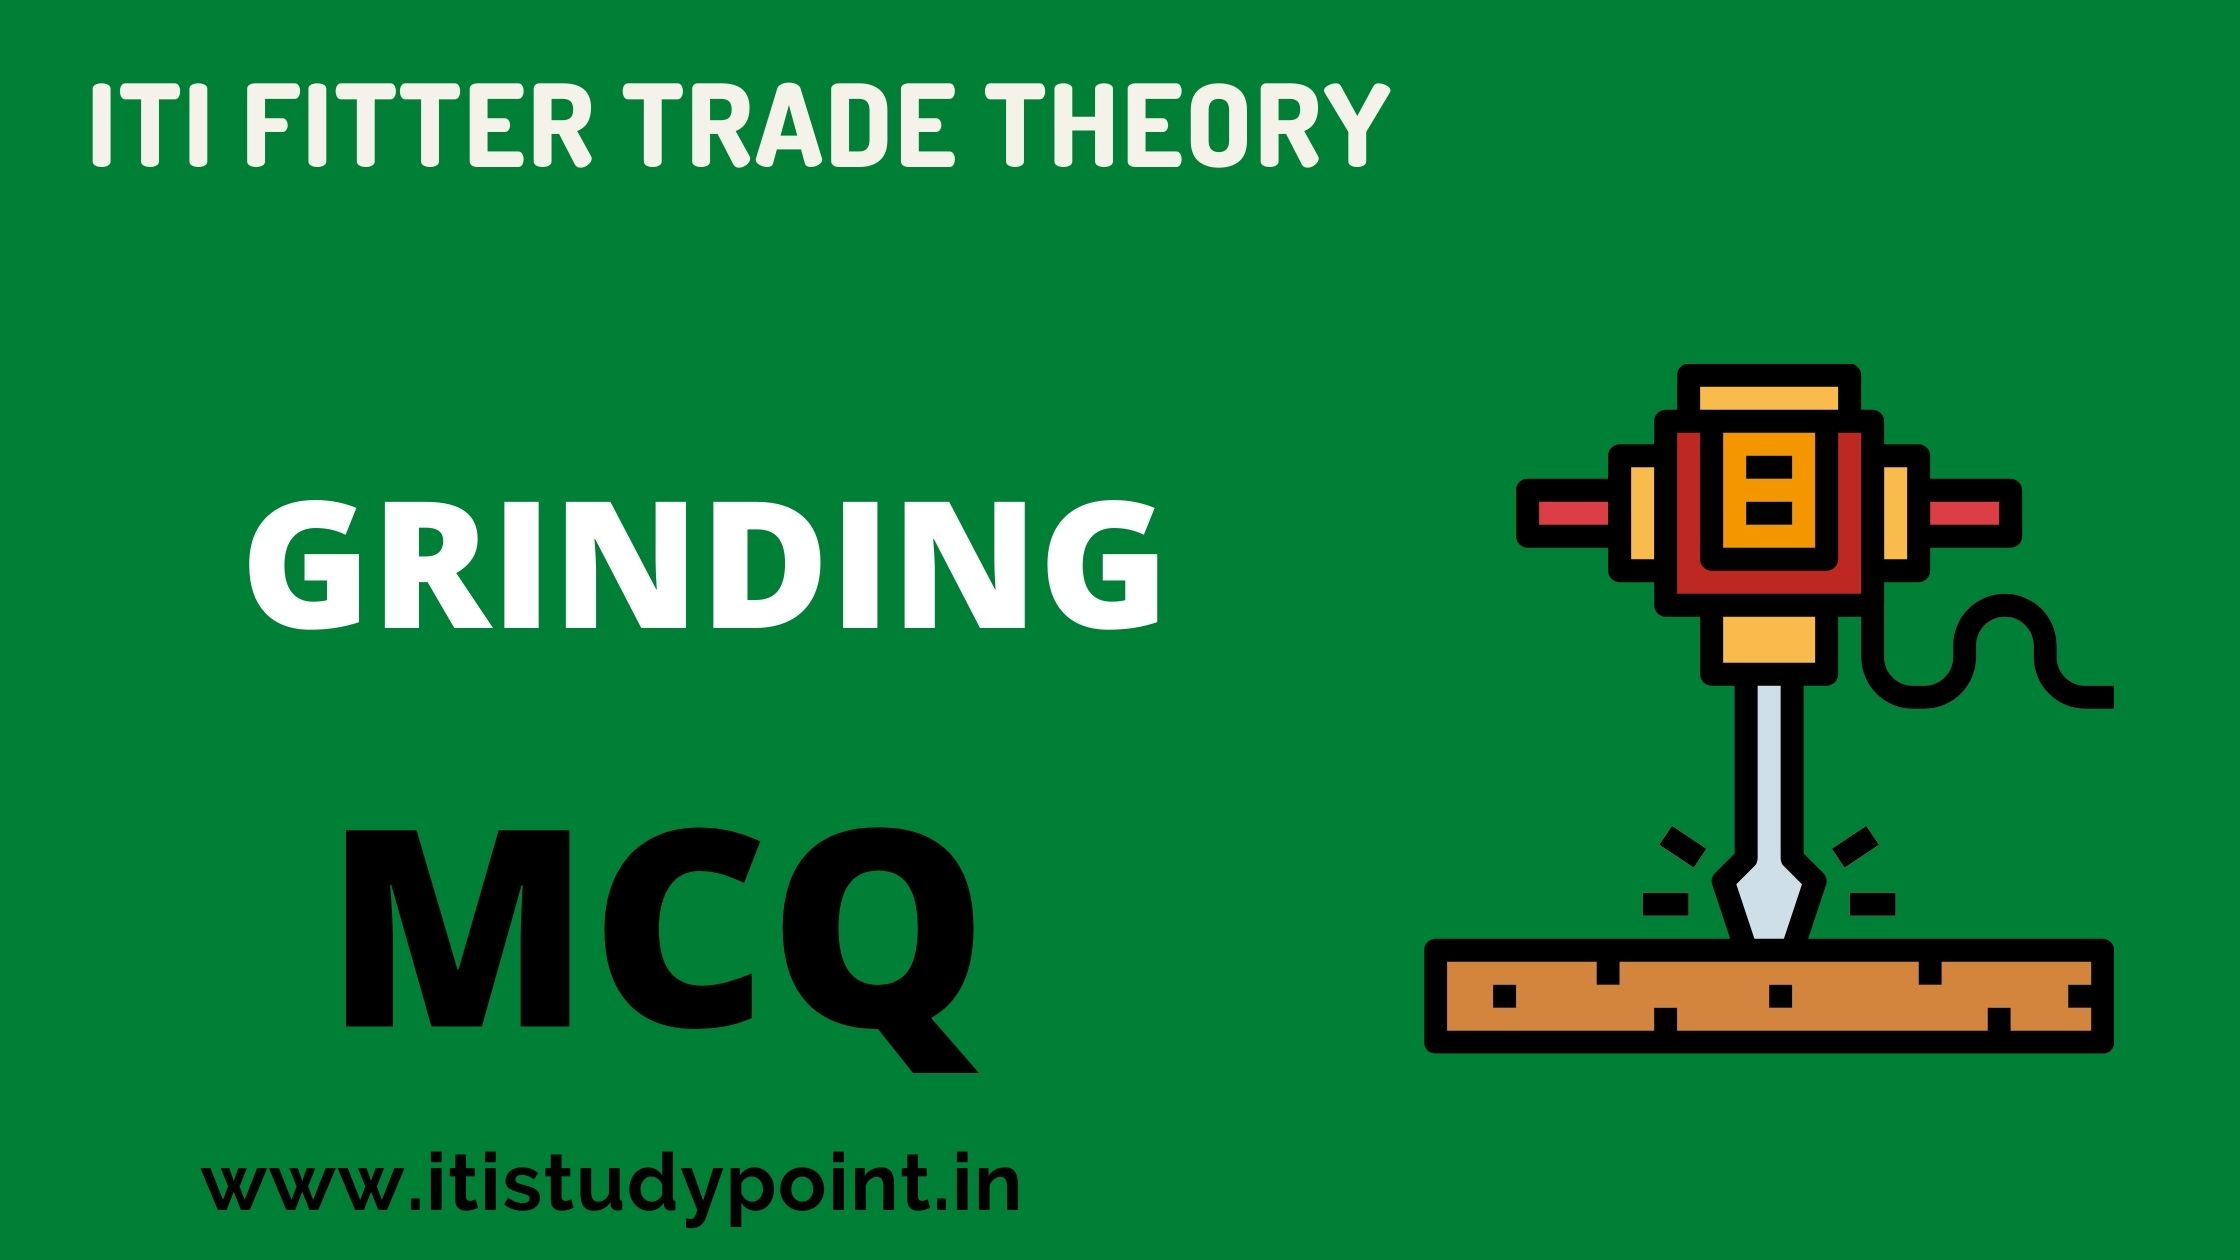 GRINDING MCQ – ITI Fitter Trade Theory